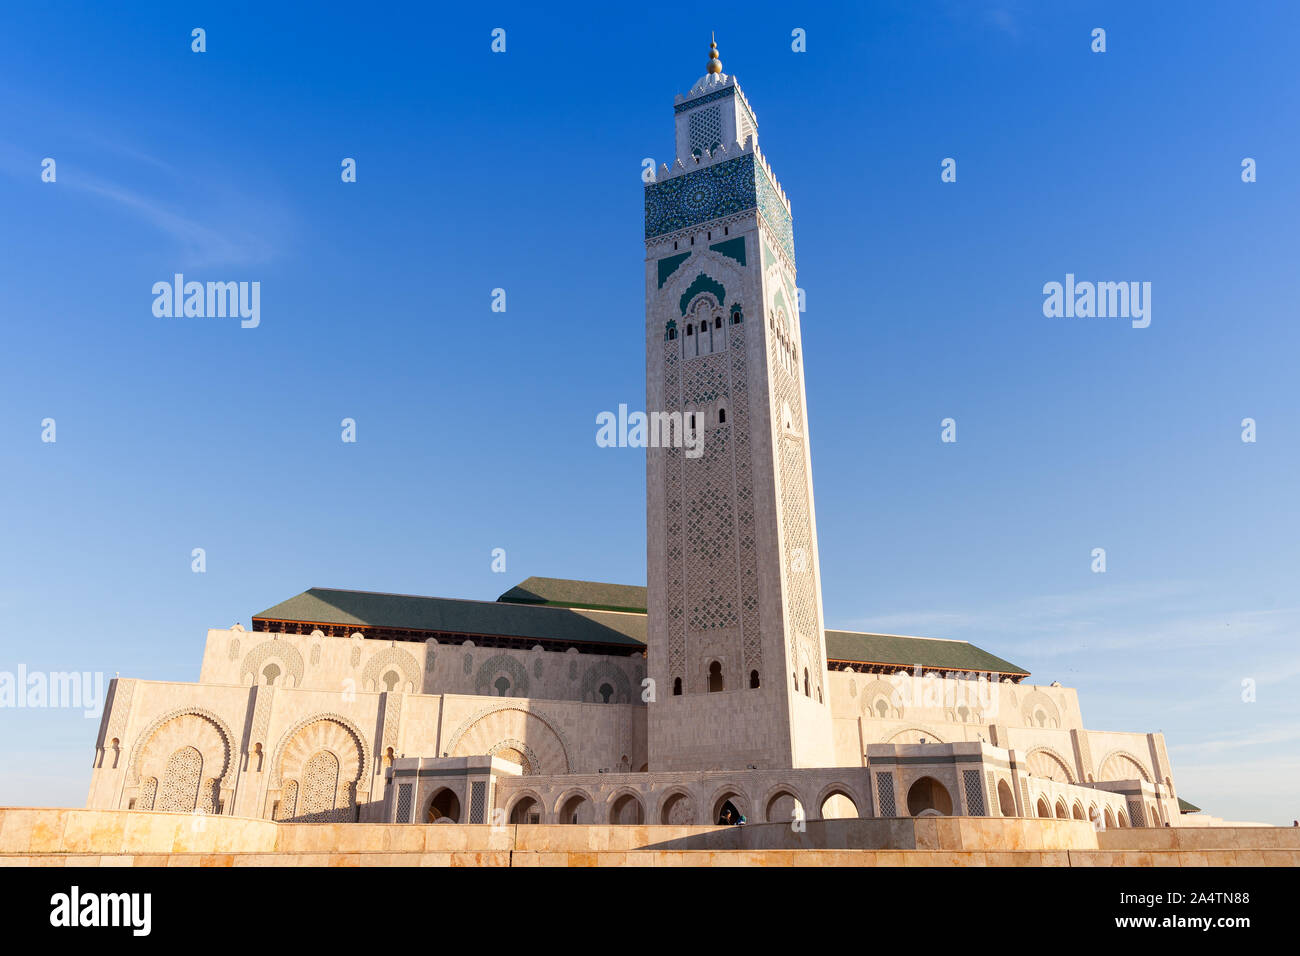 Mosque Hasan II in Casablanca, Morocco on a sunny morning. It is one of the biggest mosques in the world with the highest minaret, 210 meters high. Stock Photo